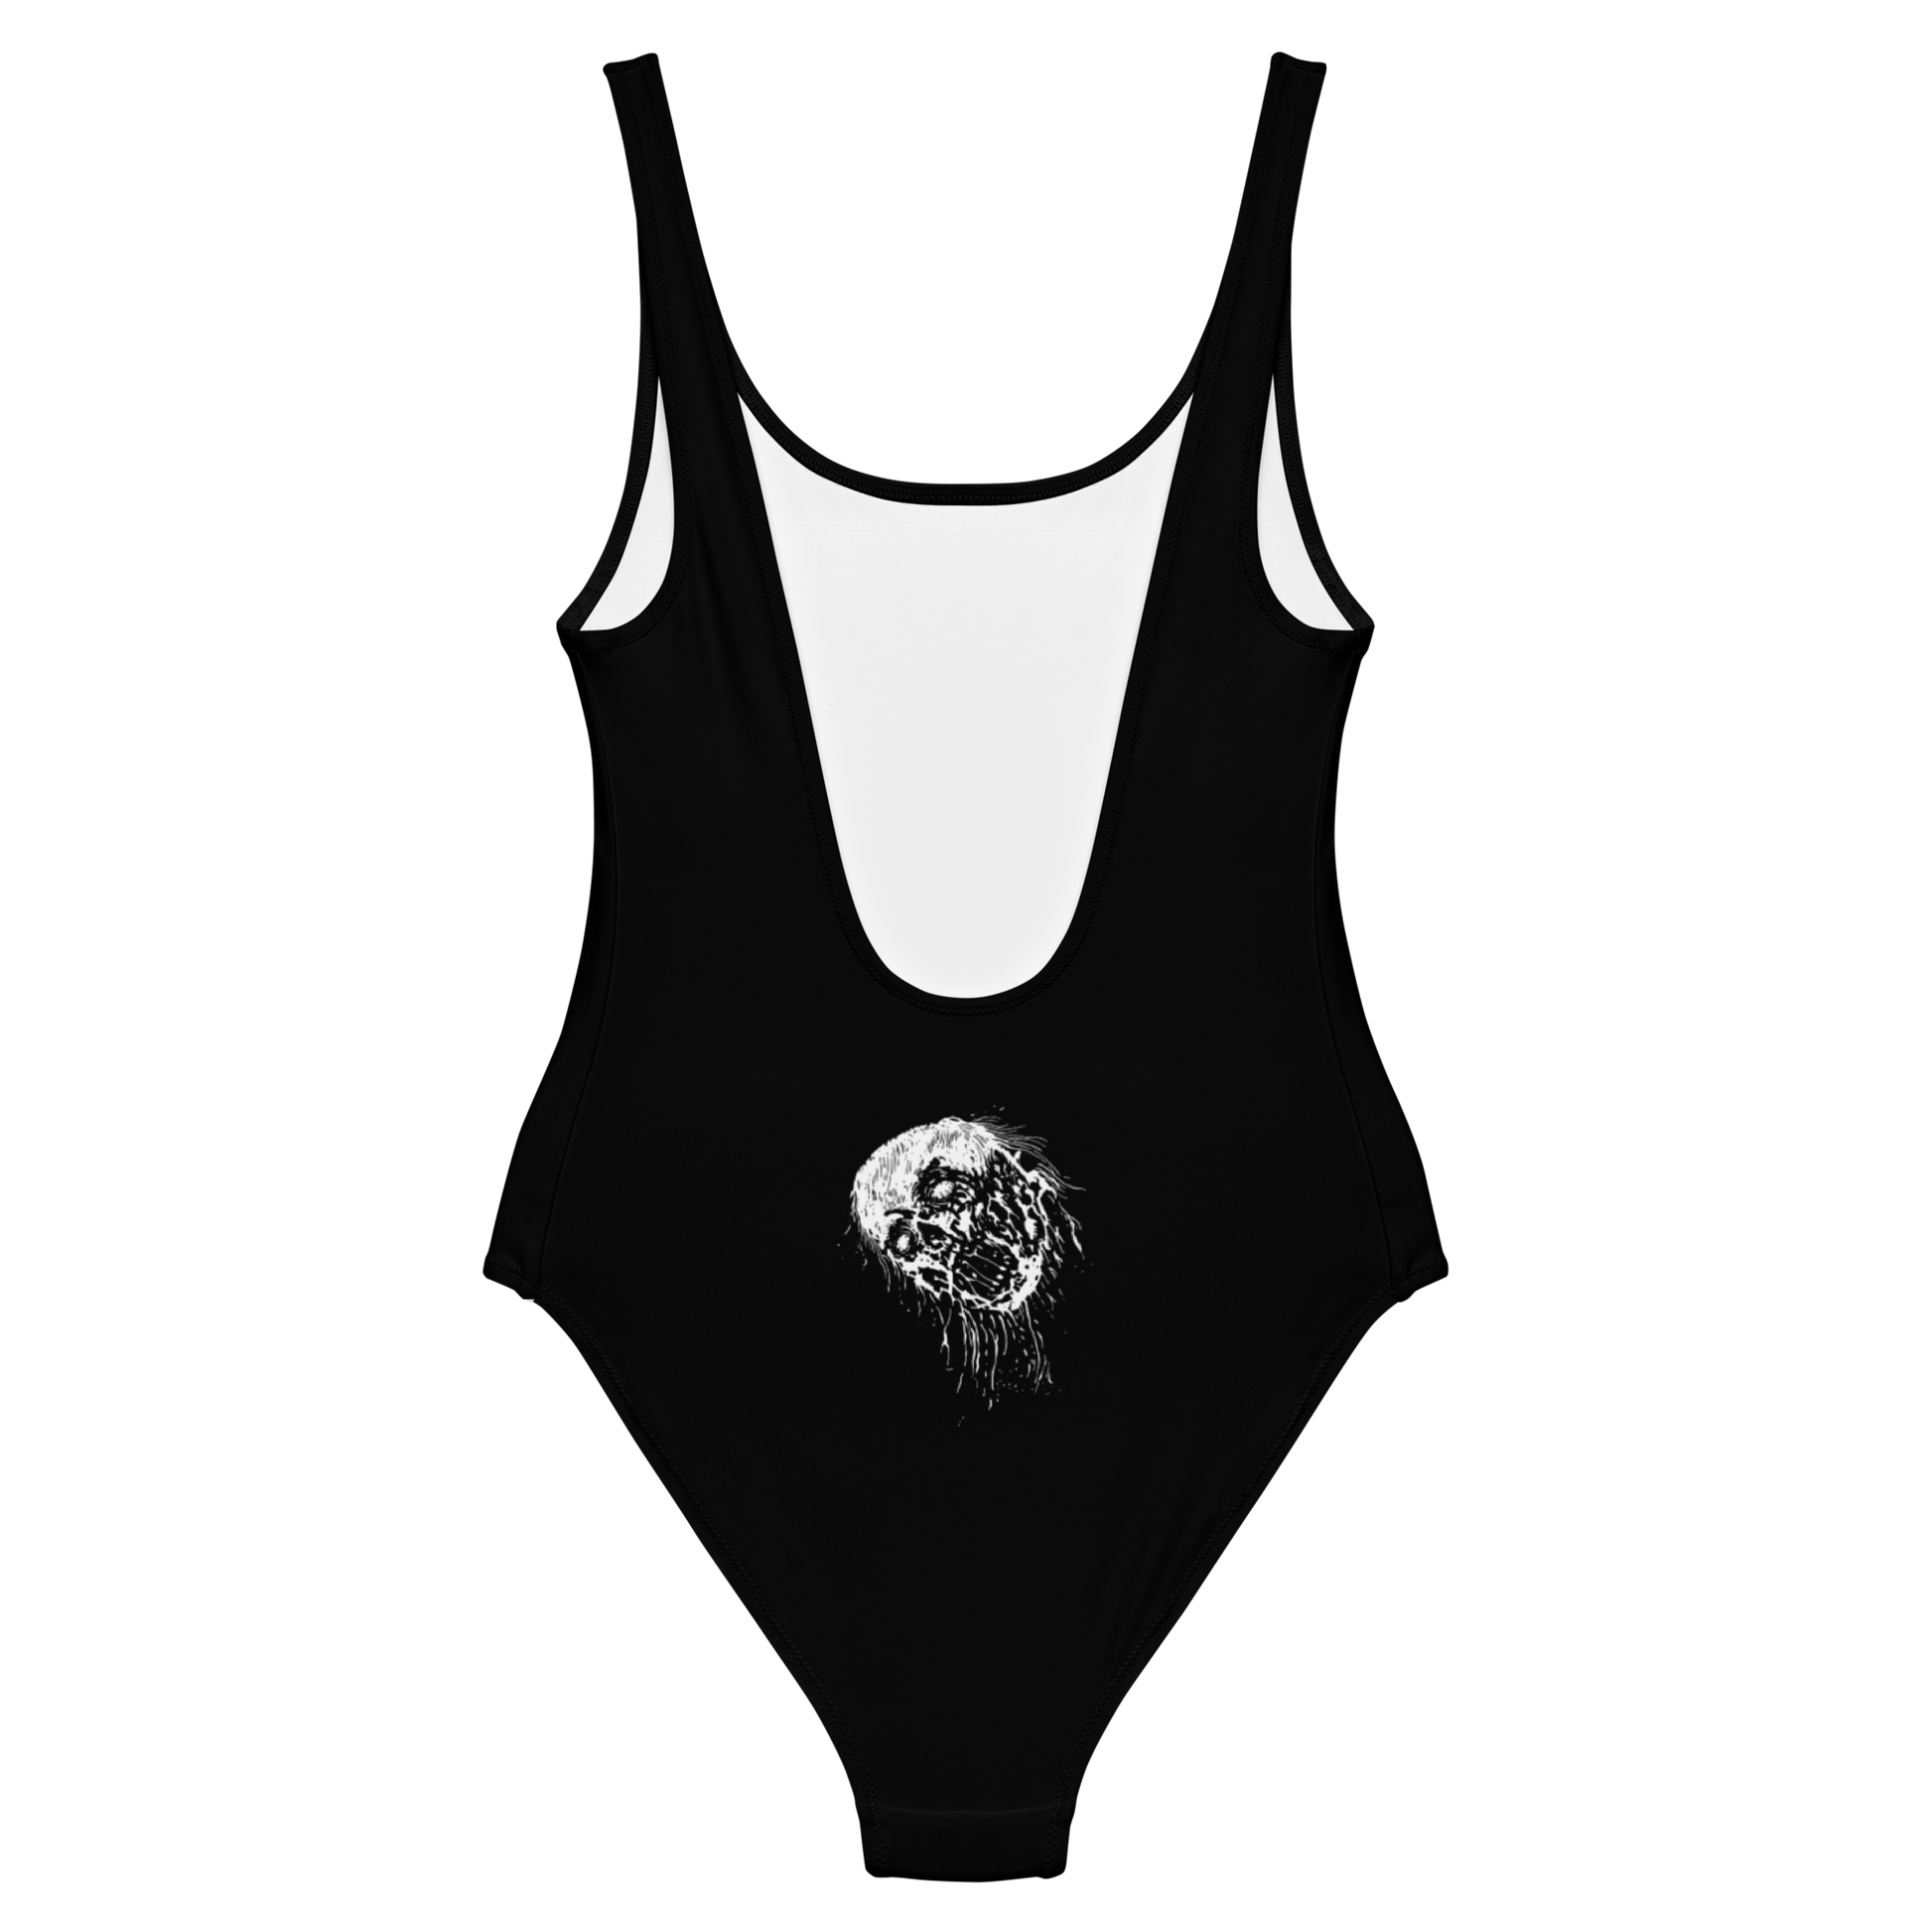 Hellfekted War official one-piece swimsuit by Metal Mistress